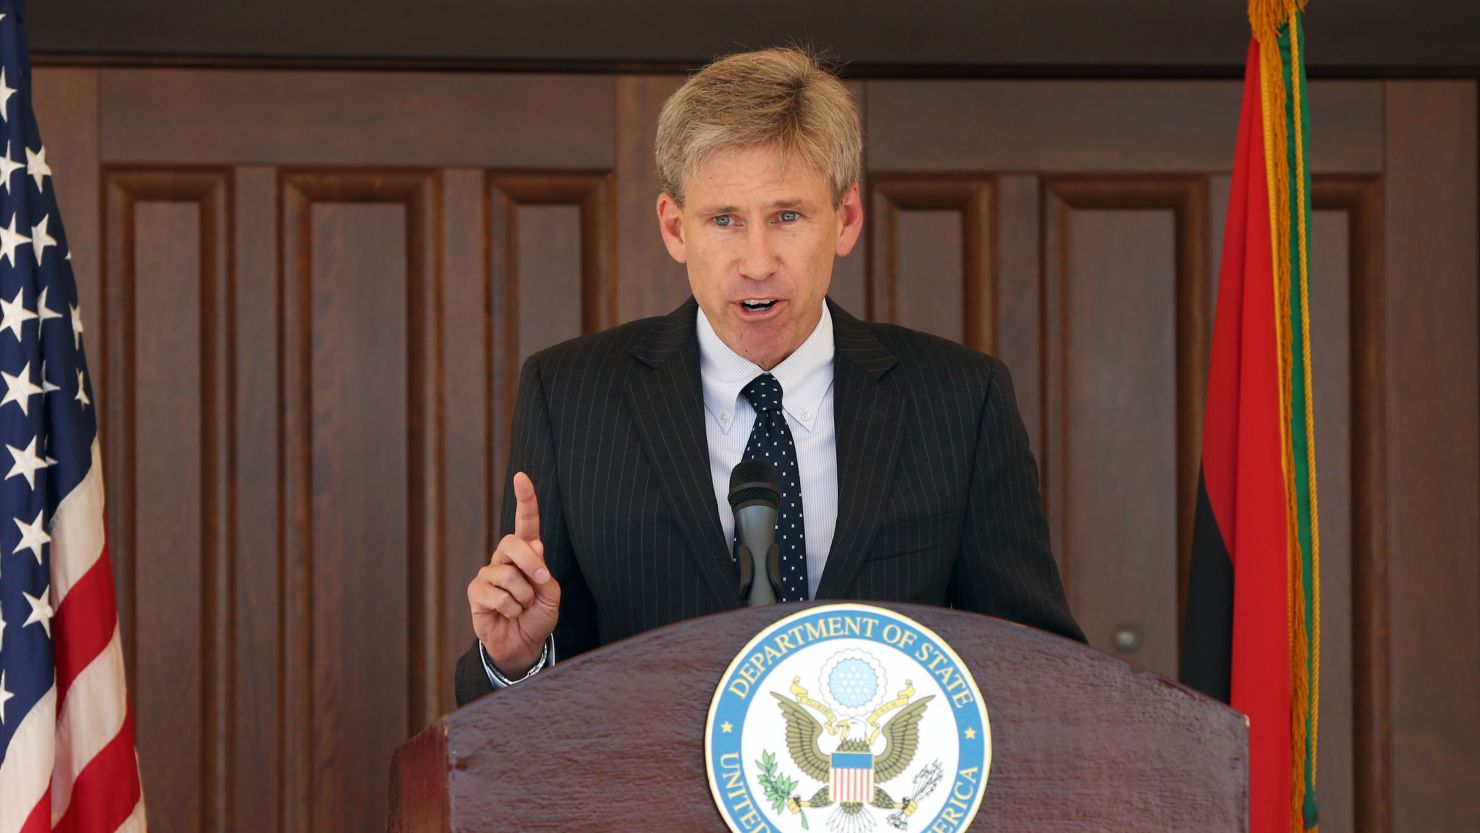 Ambassador Chris Stevens, pictured in August in Tripoli, Libya, died in a September attack on the U.S. Consulate in Benghazi.